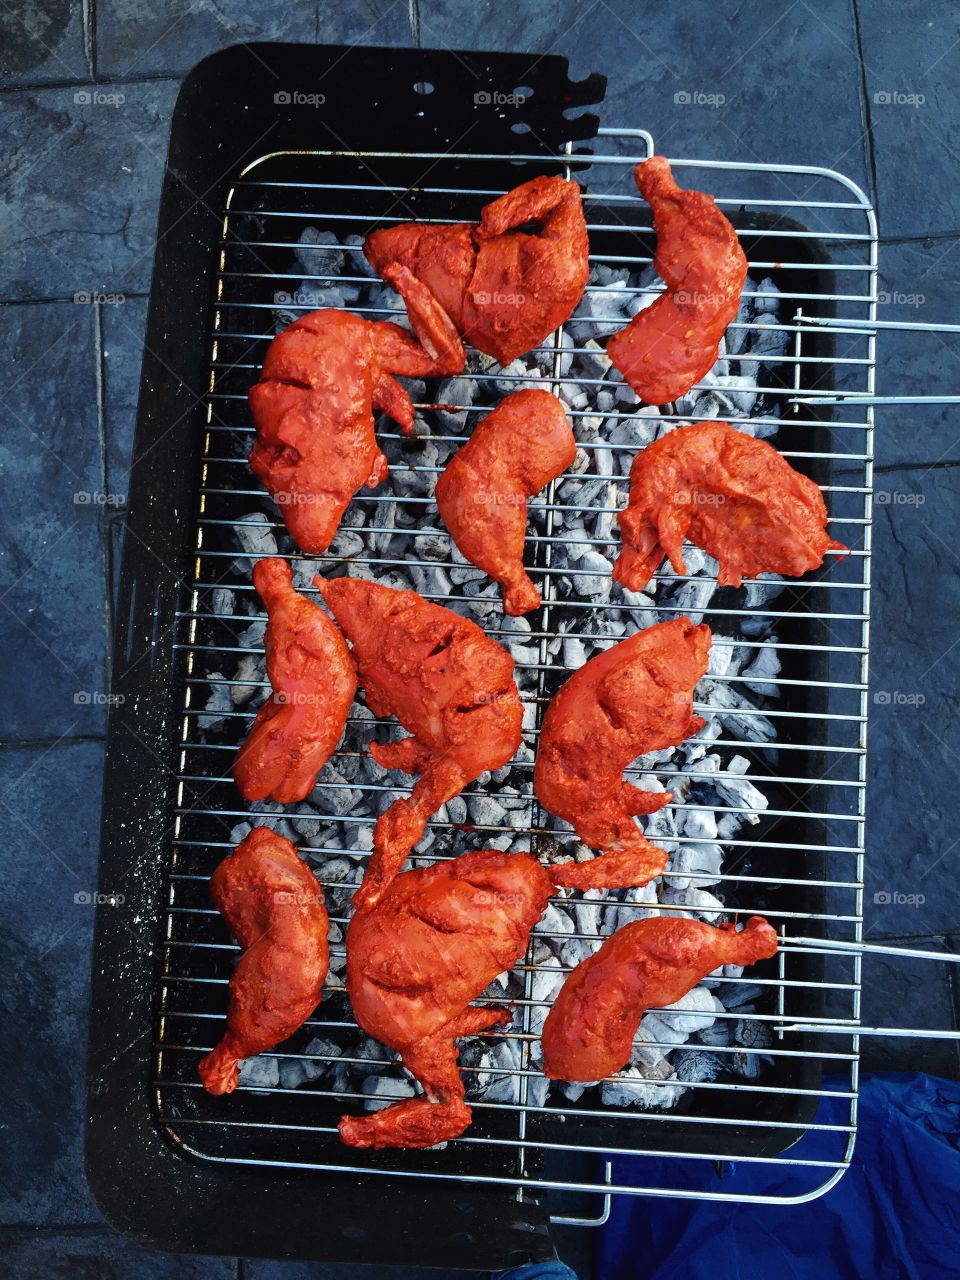 Grilled chicken on barbecue